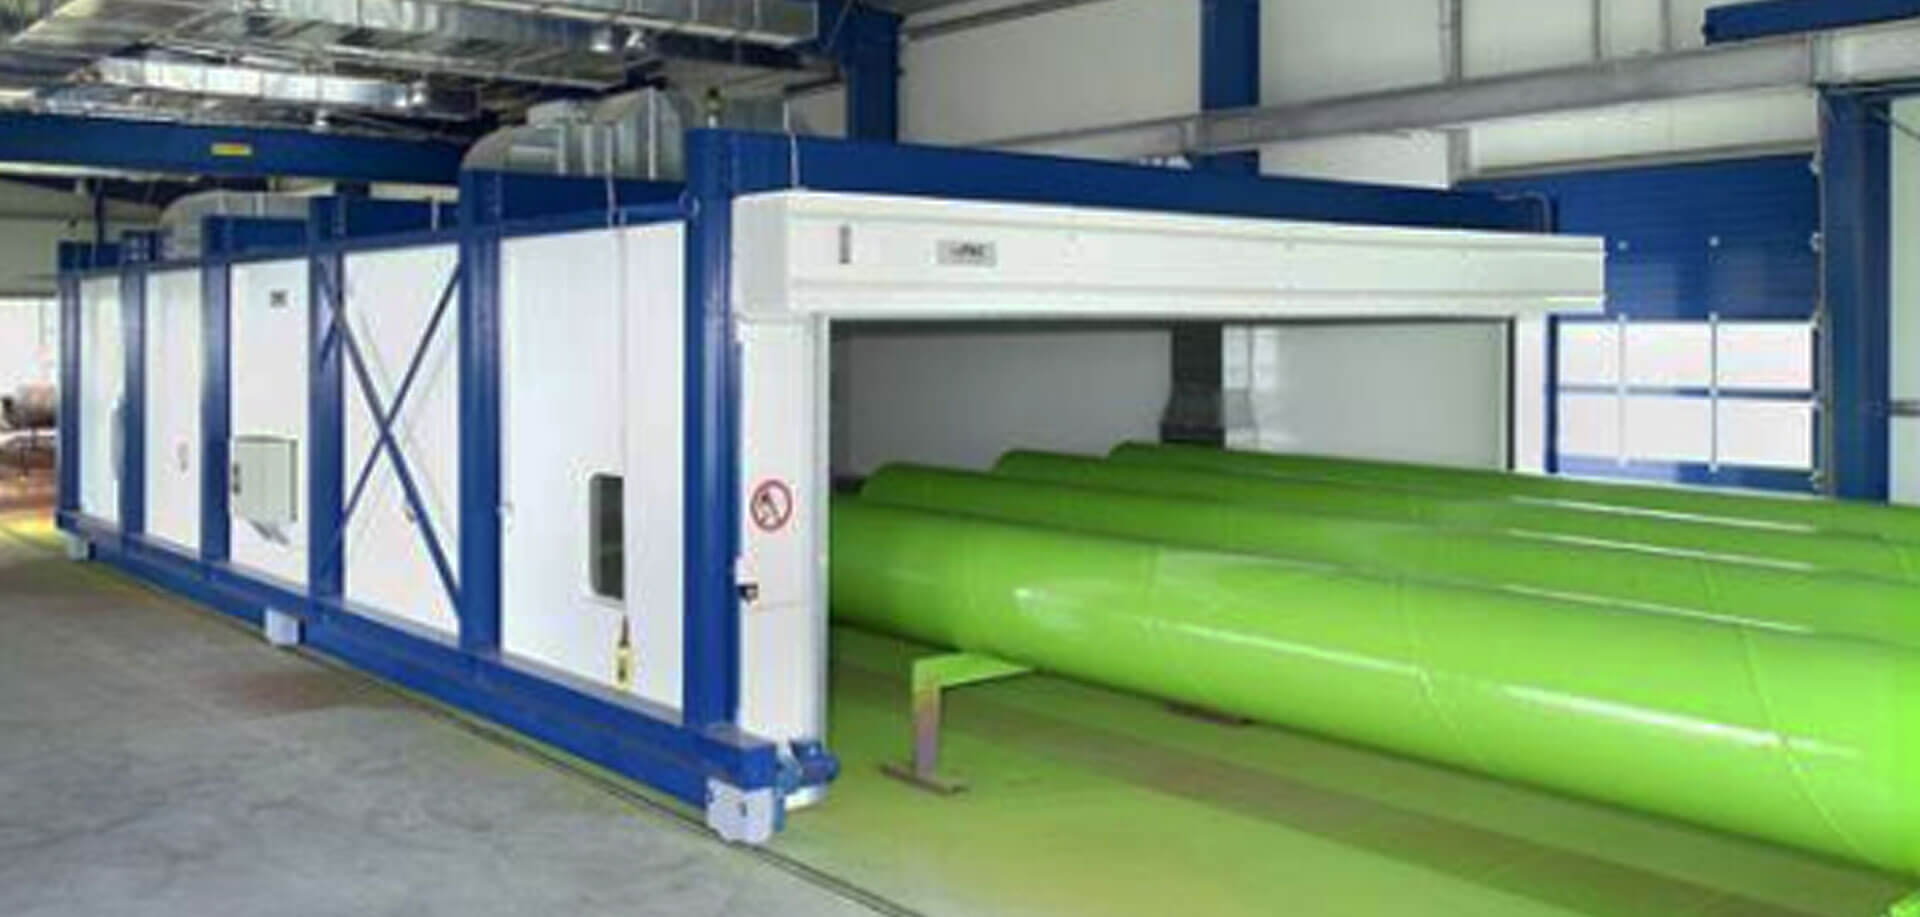 Moveable drying system - inTEC